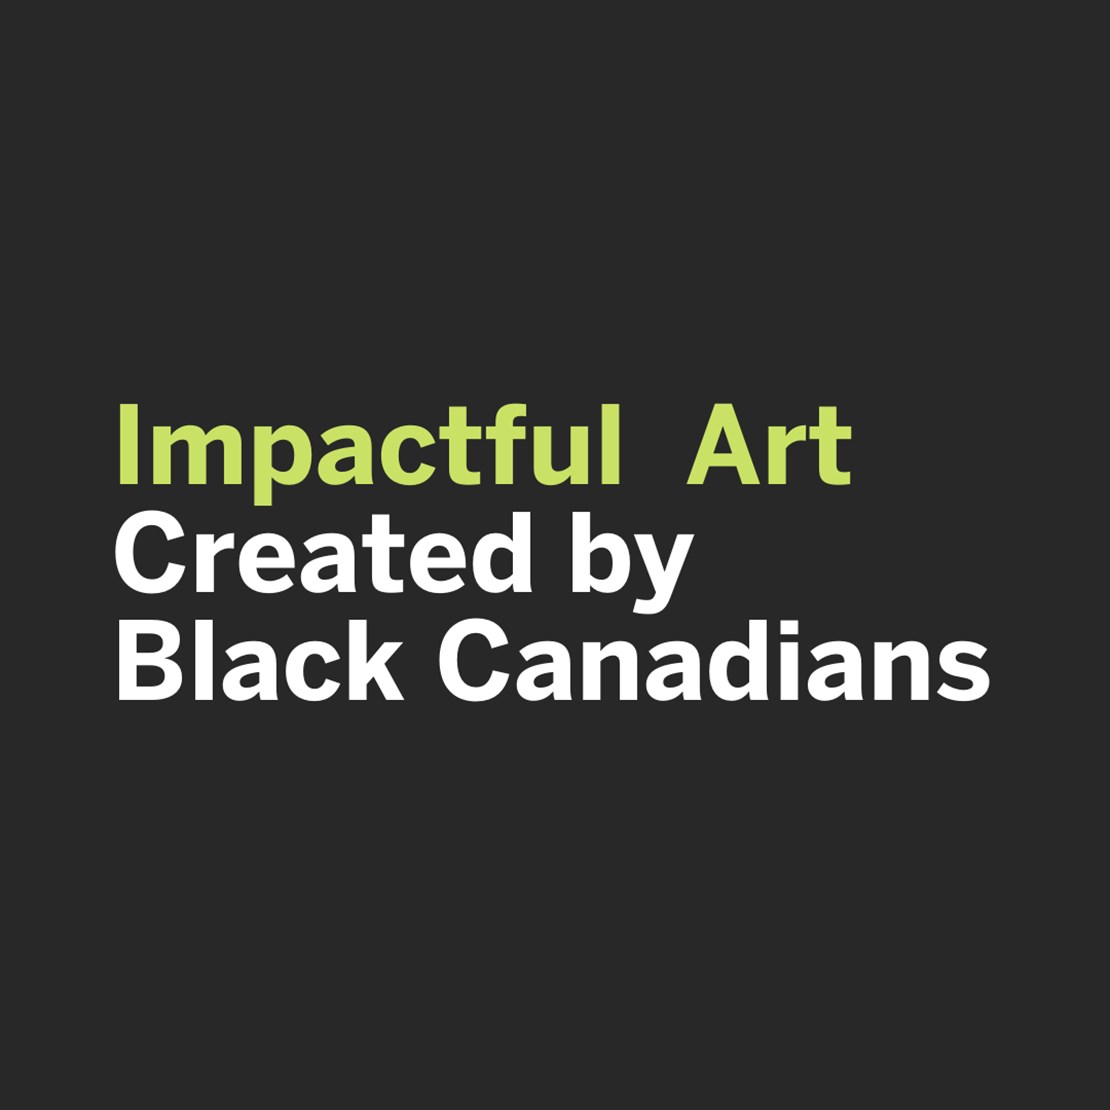 Impactful Art Created by Black Canadians